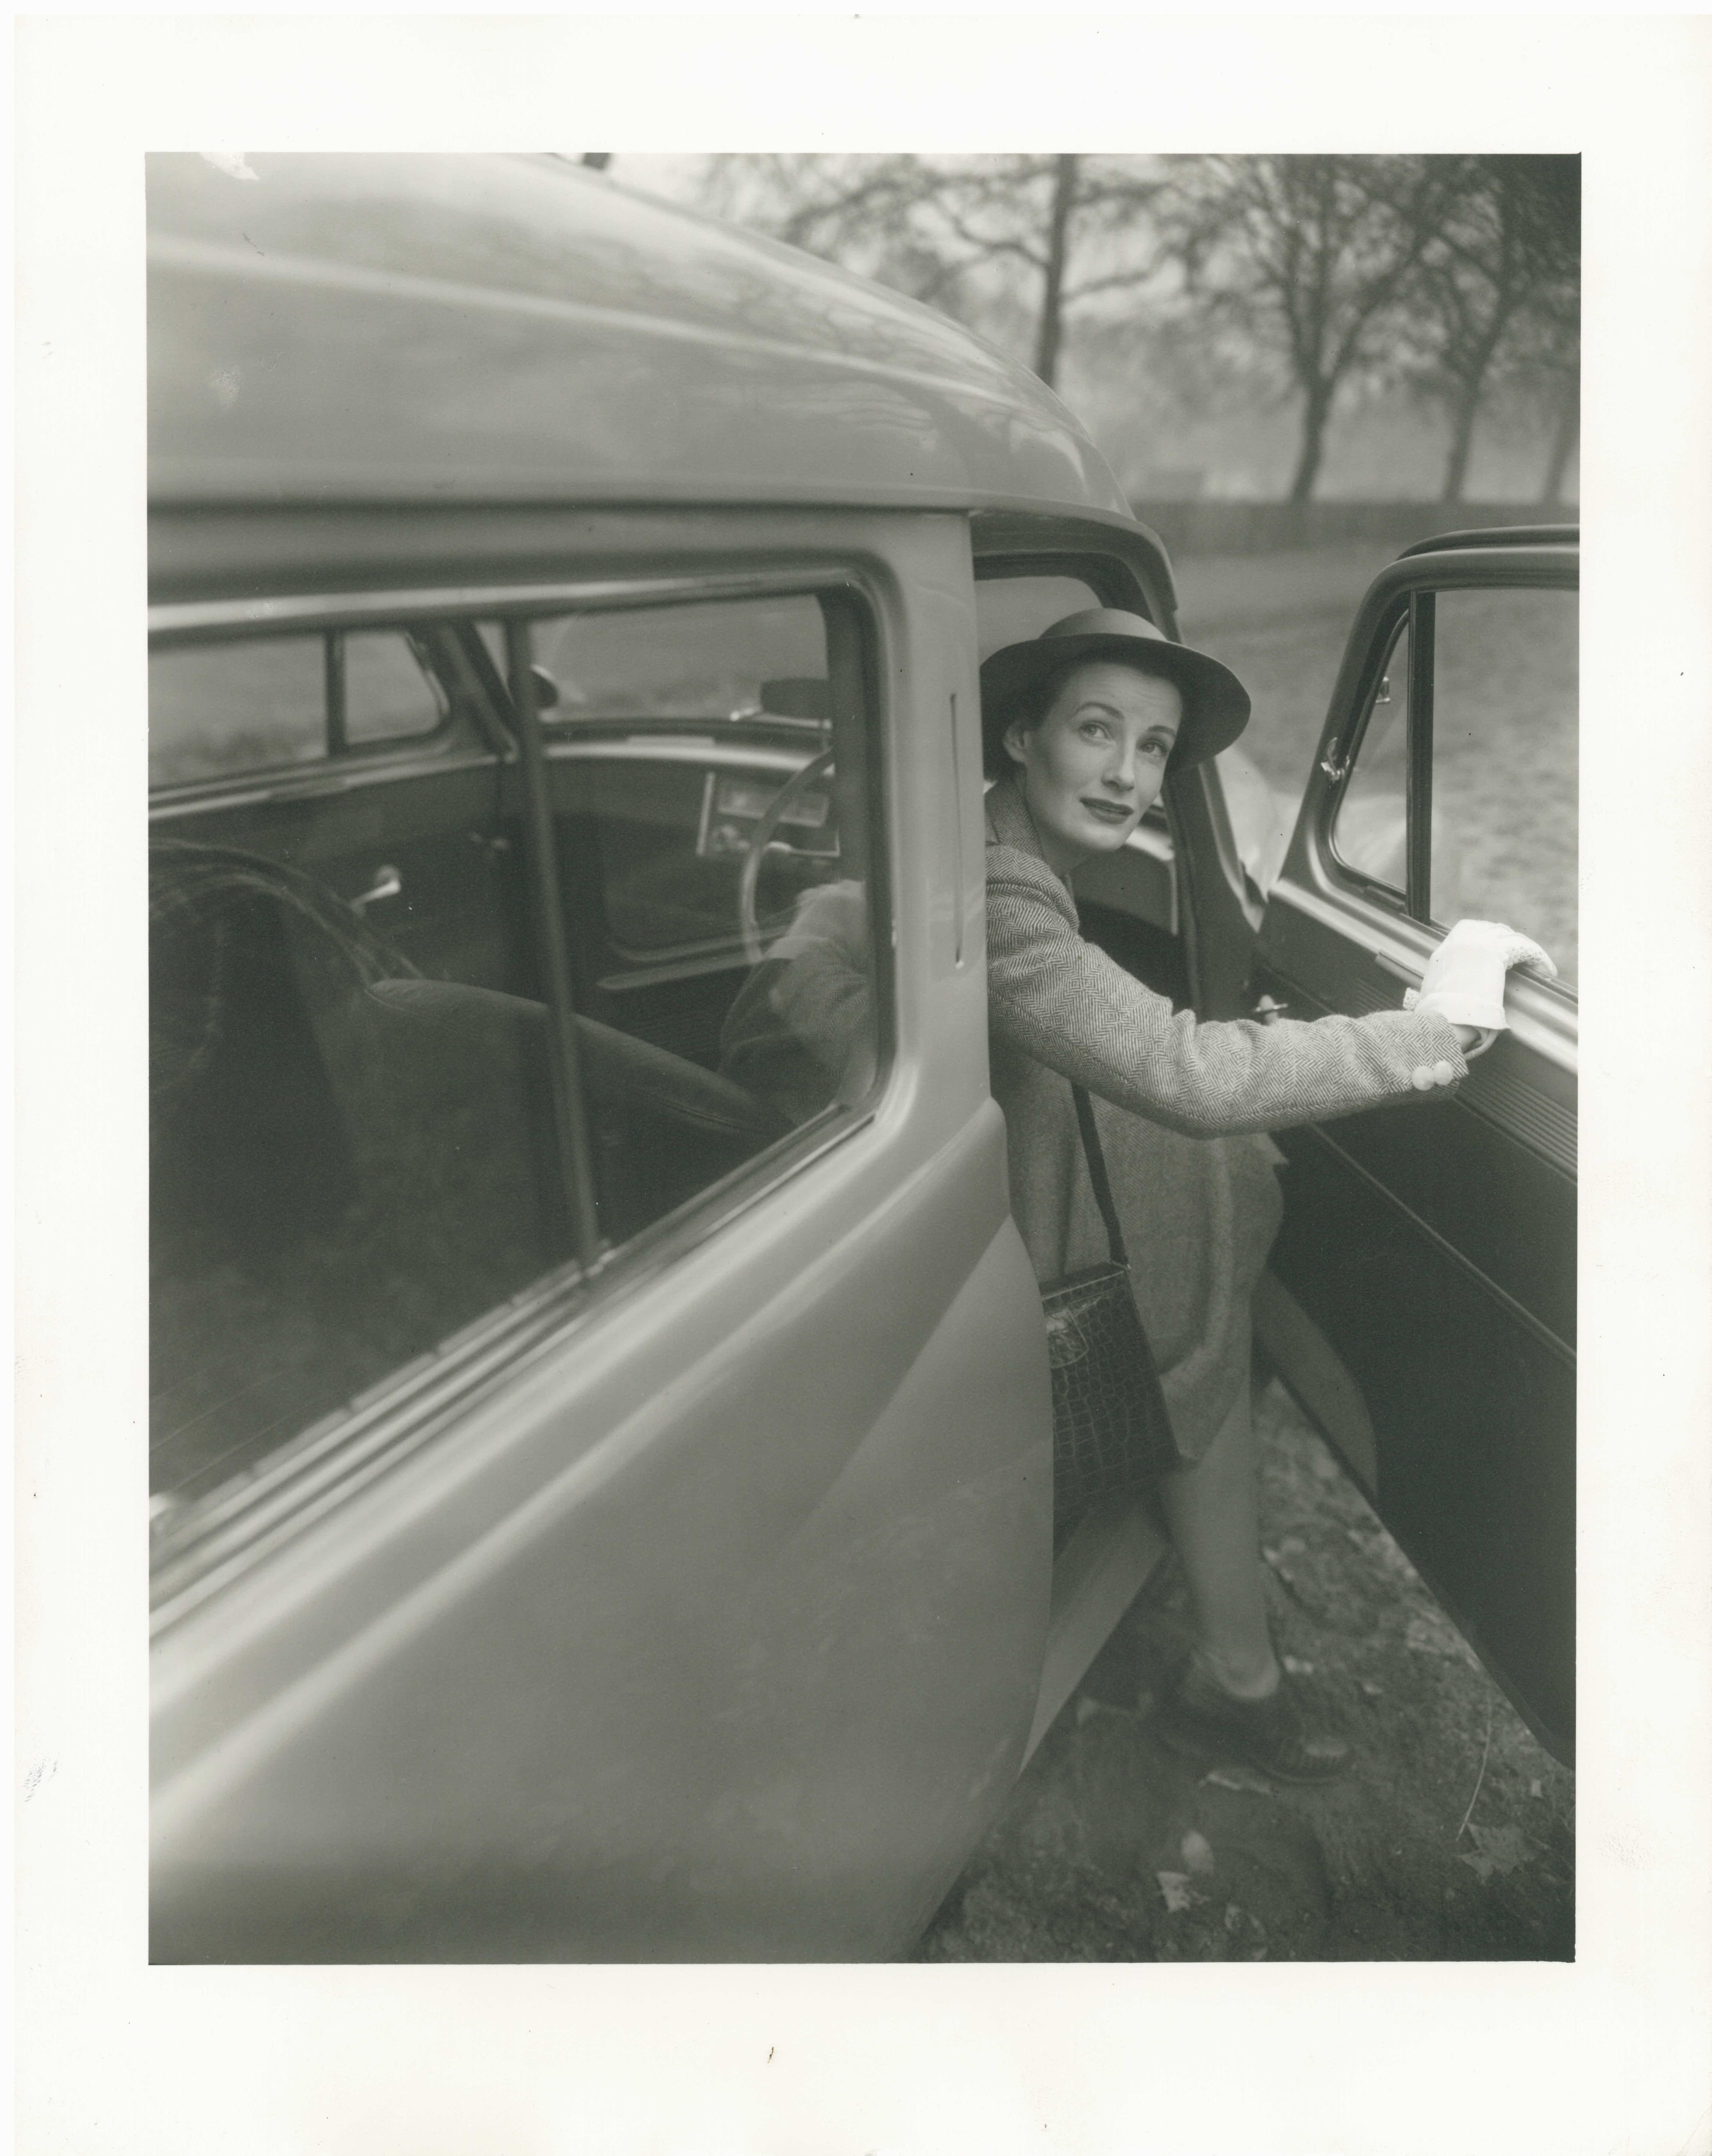 Norman Parkinson, Wenda getting out of car, 1949